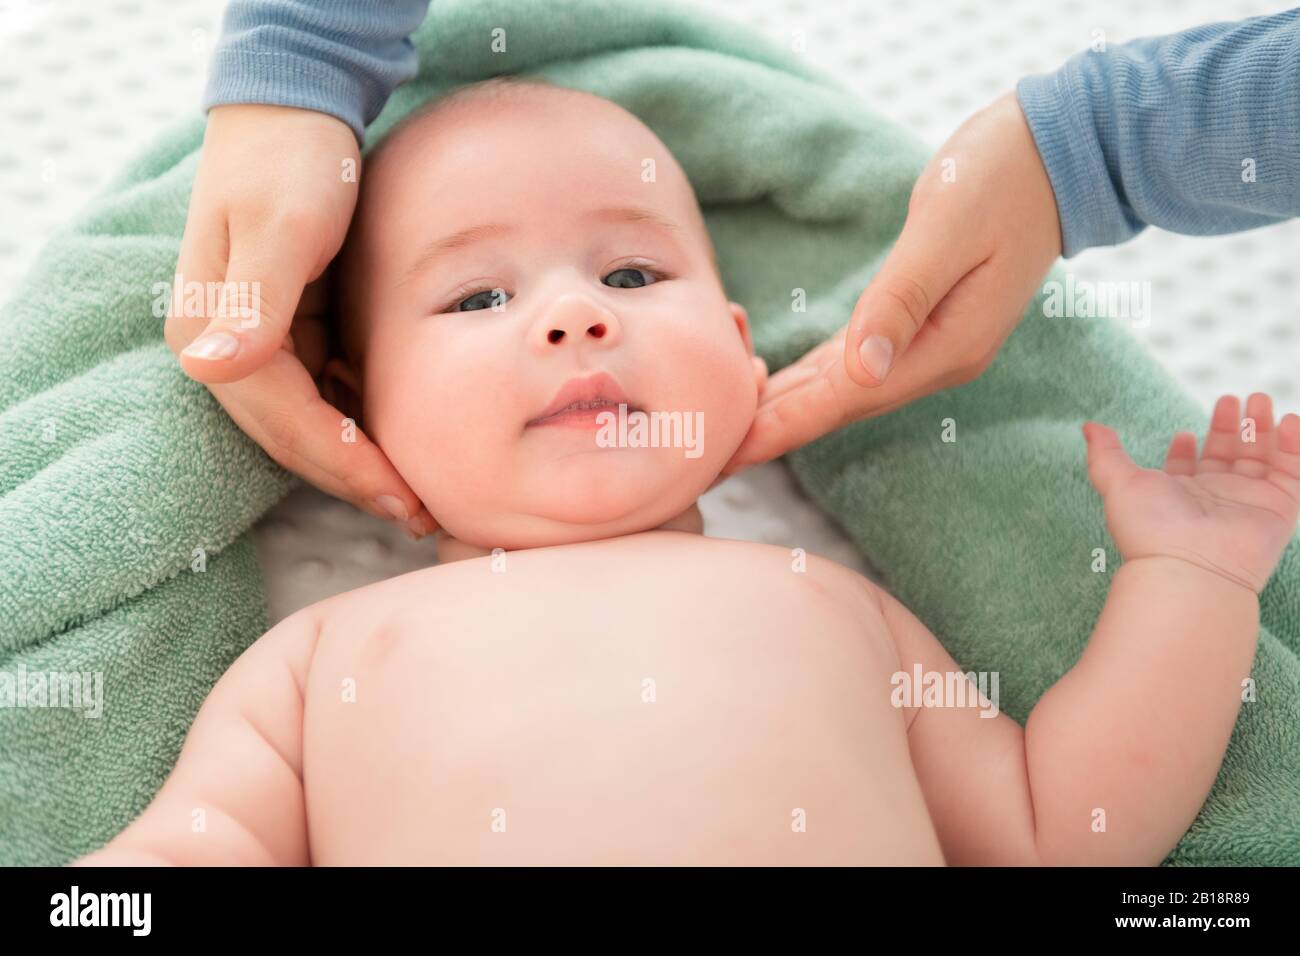 Baby face massage. Mother gently stroking baby boy face with both hands. Close up cropped shot. Stock Photo